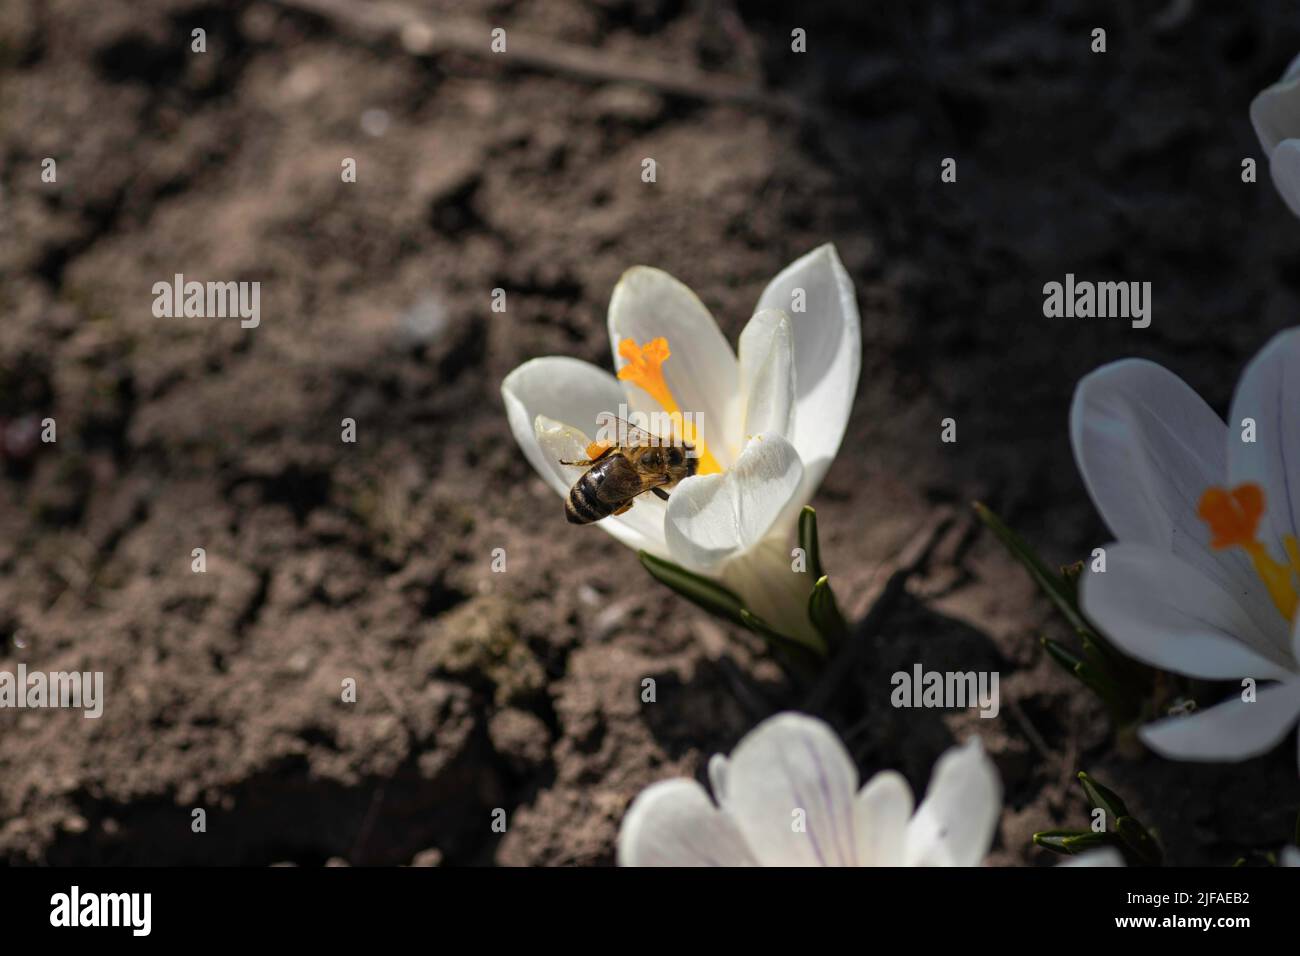 large white flower with a yellow center and a bee on it Stock Photo